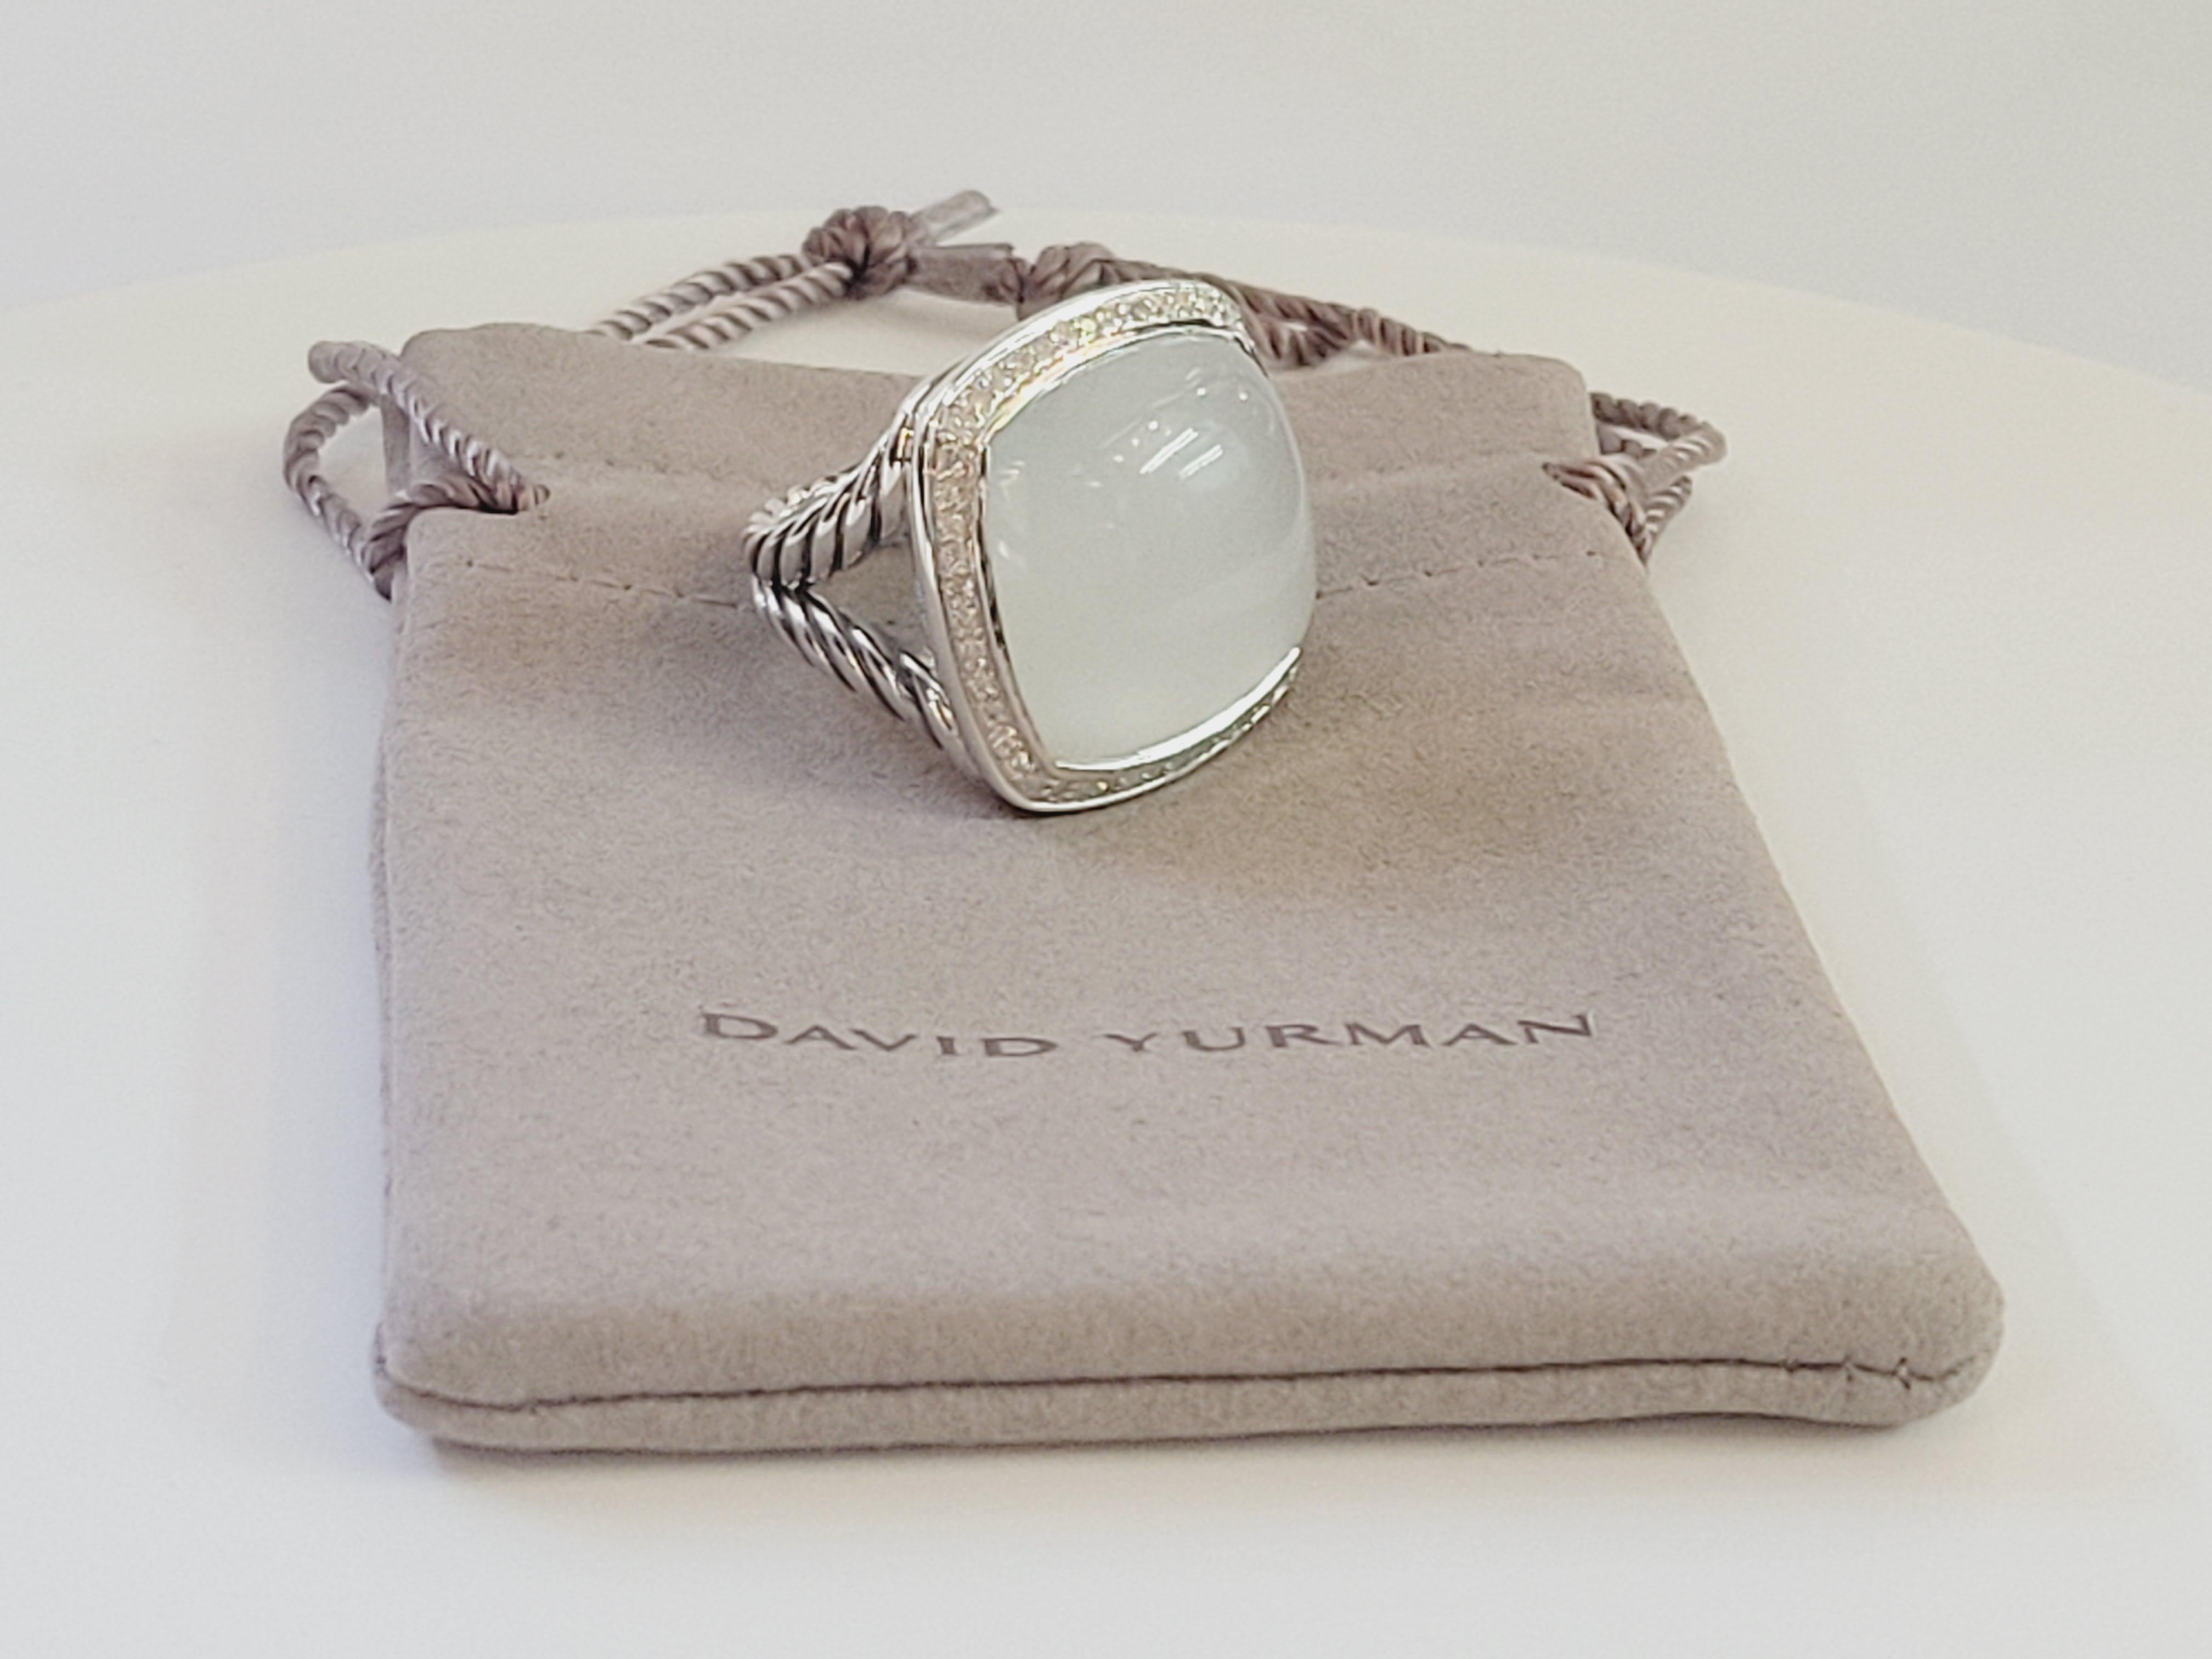 David Yurman Albion Rings With Rock Crystal And Diamond In Excellent Condition For Sale In New York, NY